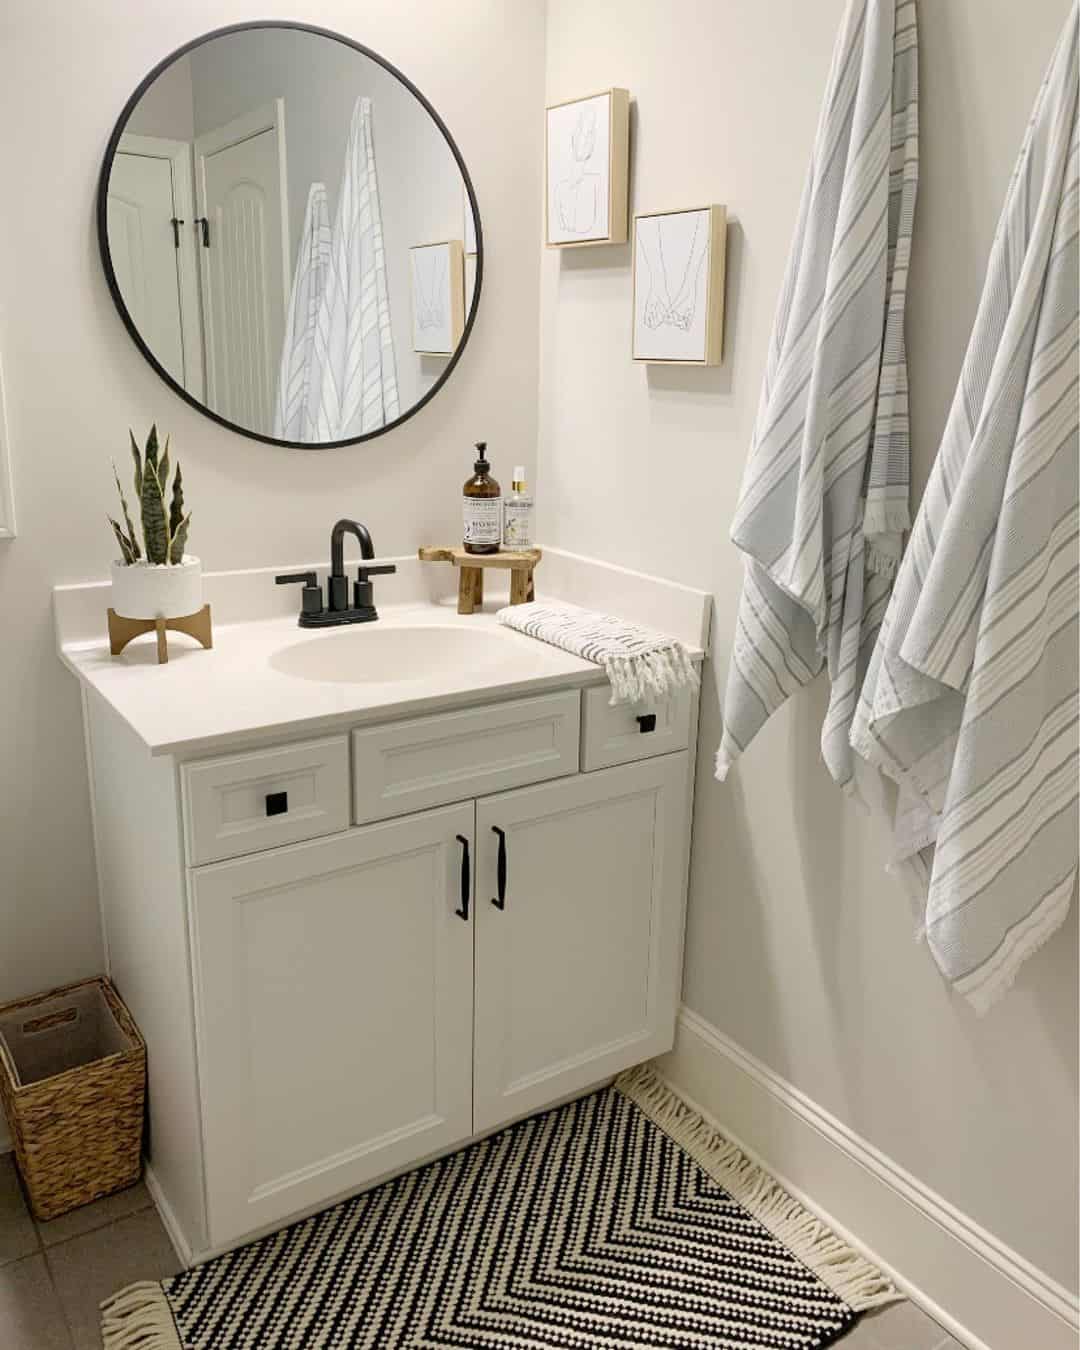 30 Charming Small Bathroom Vanity Ideas for Tiny Spaces